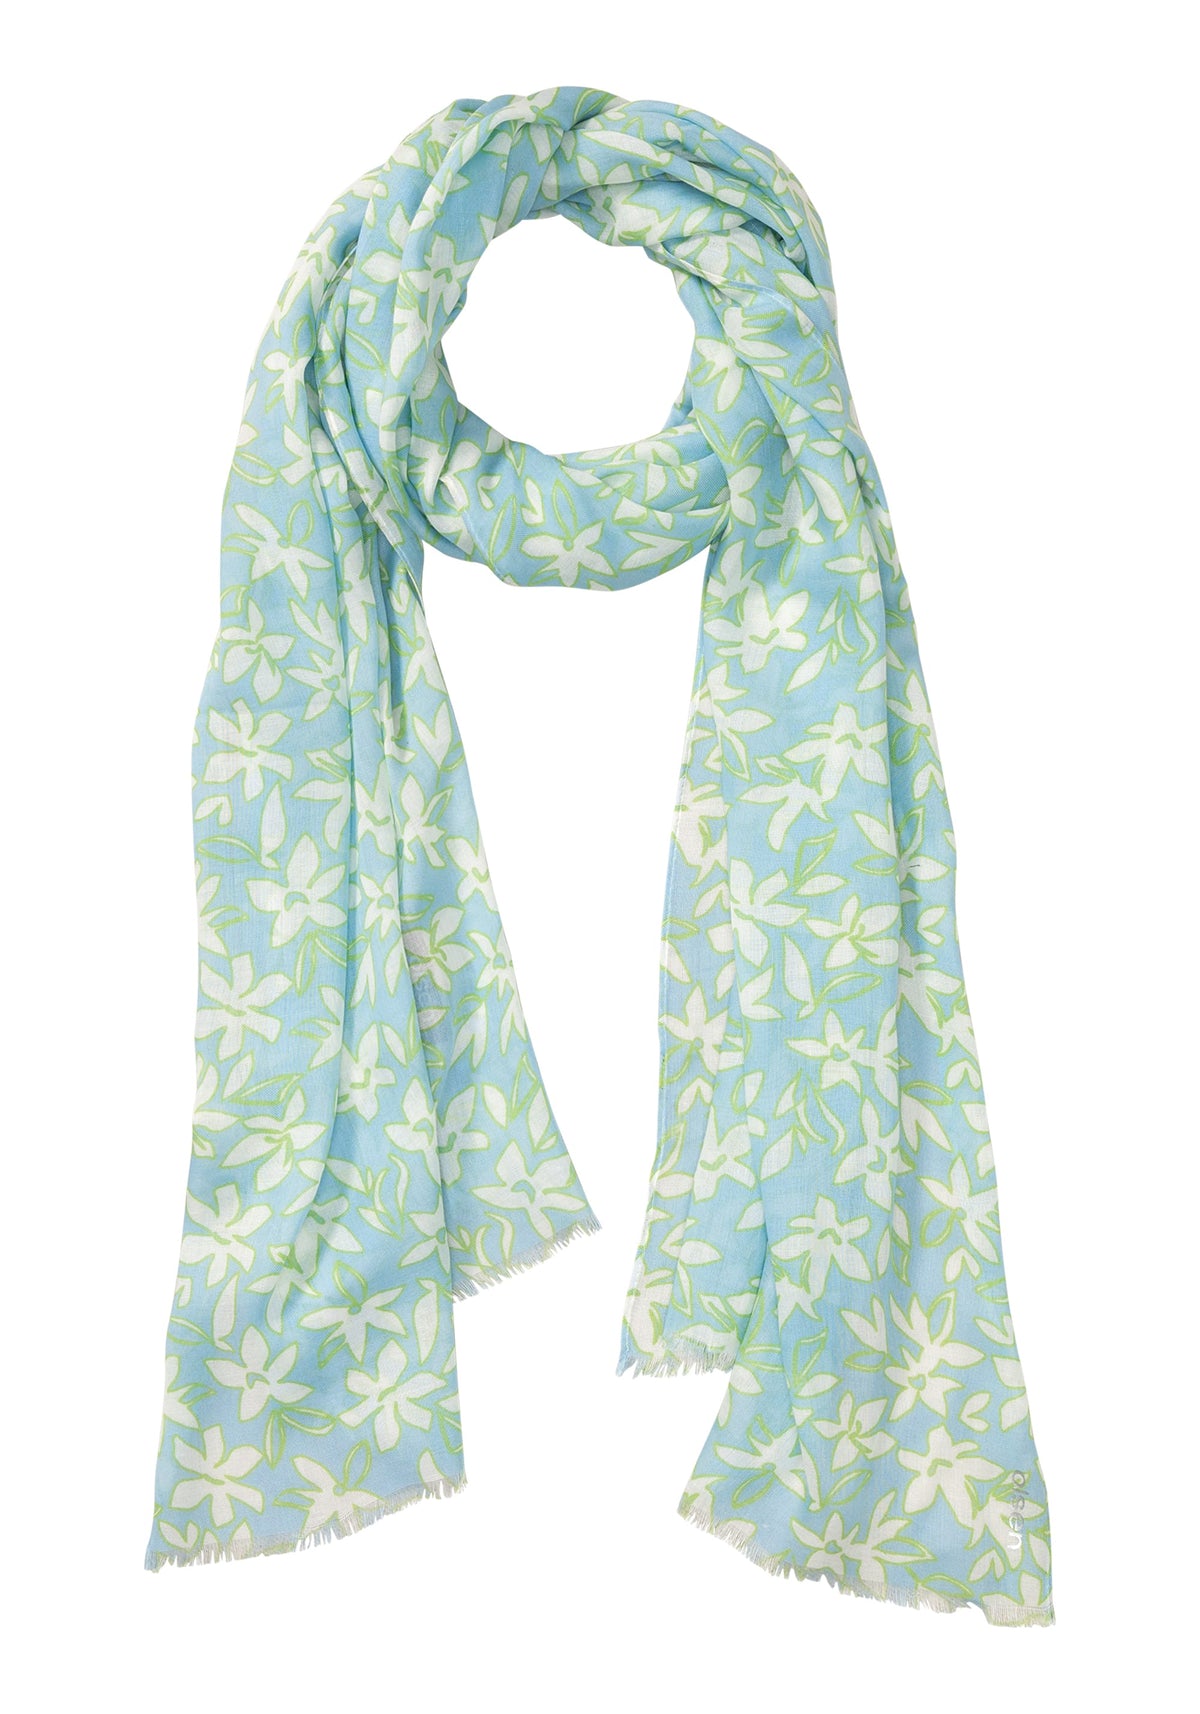 Floral Print Scarf with Frayed Edge Trim